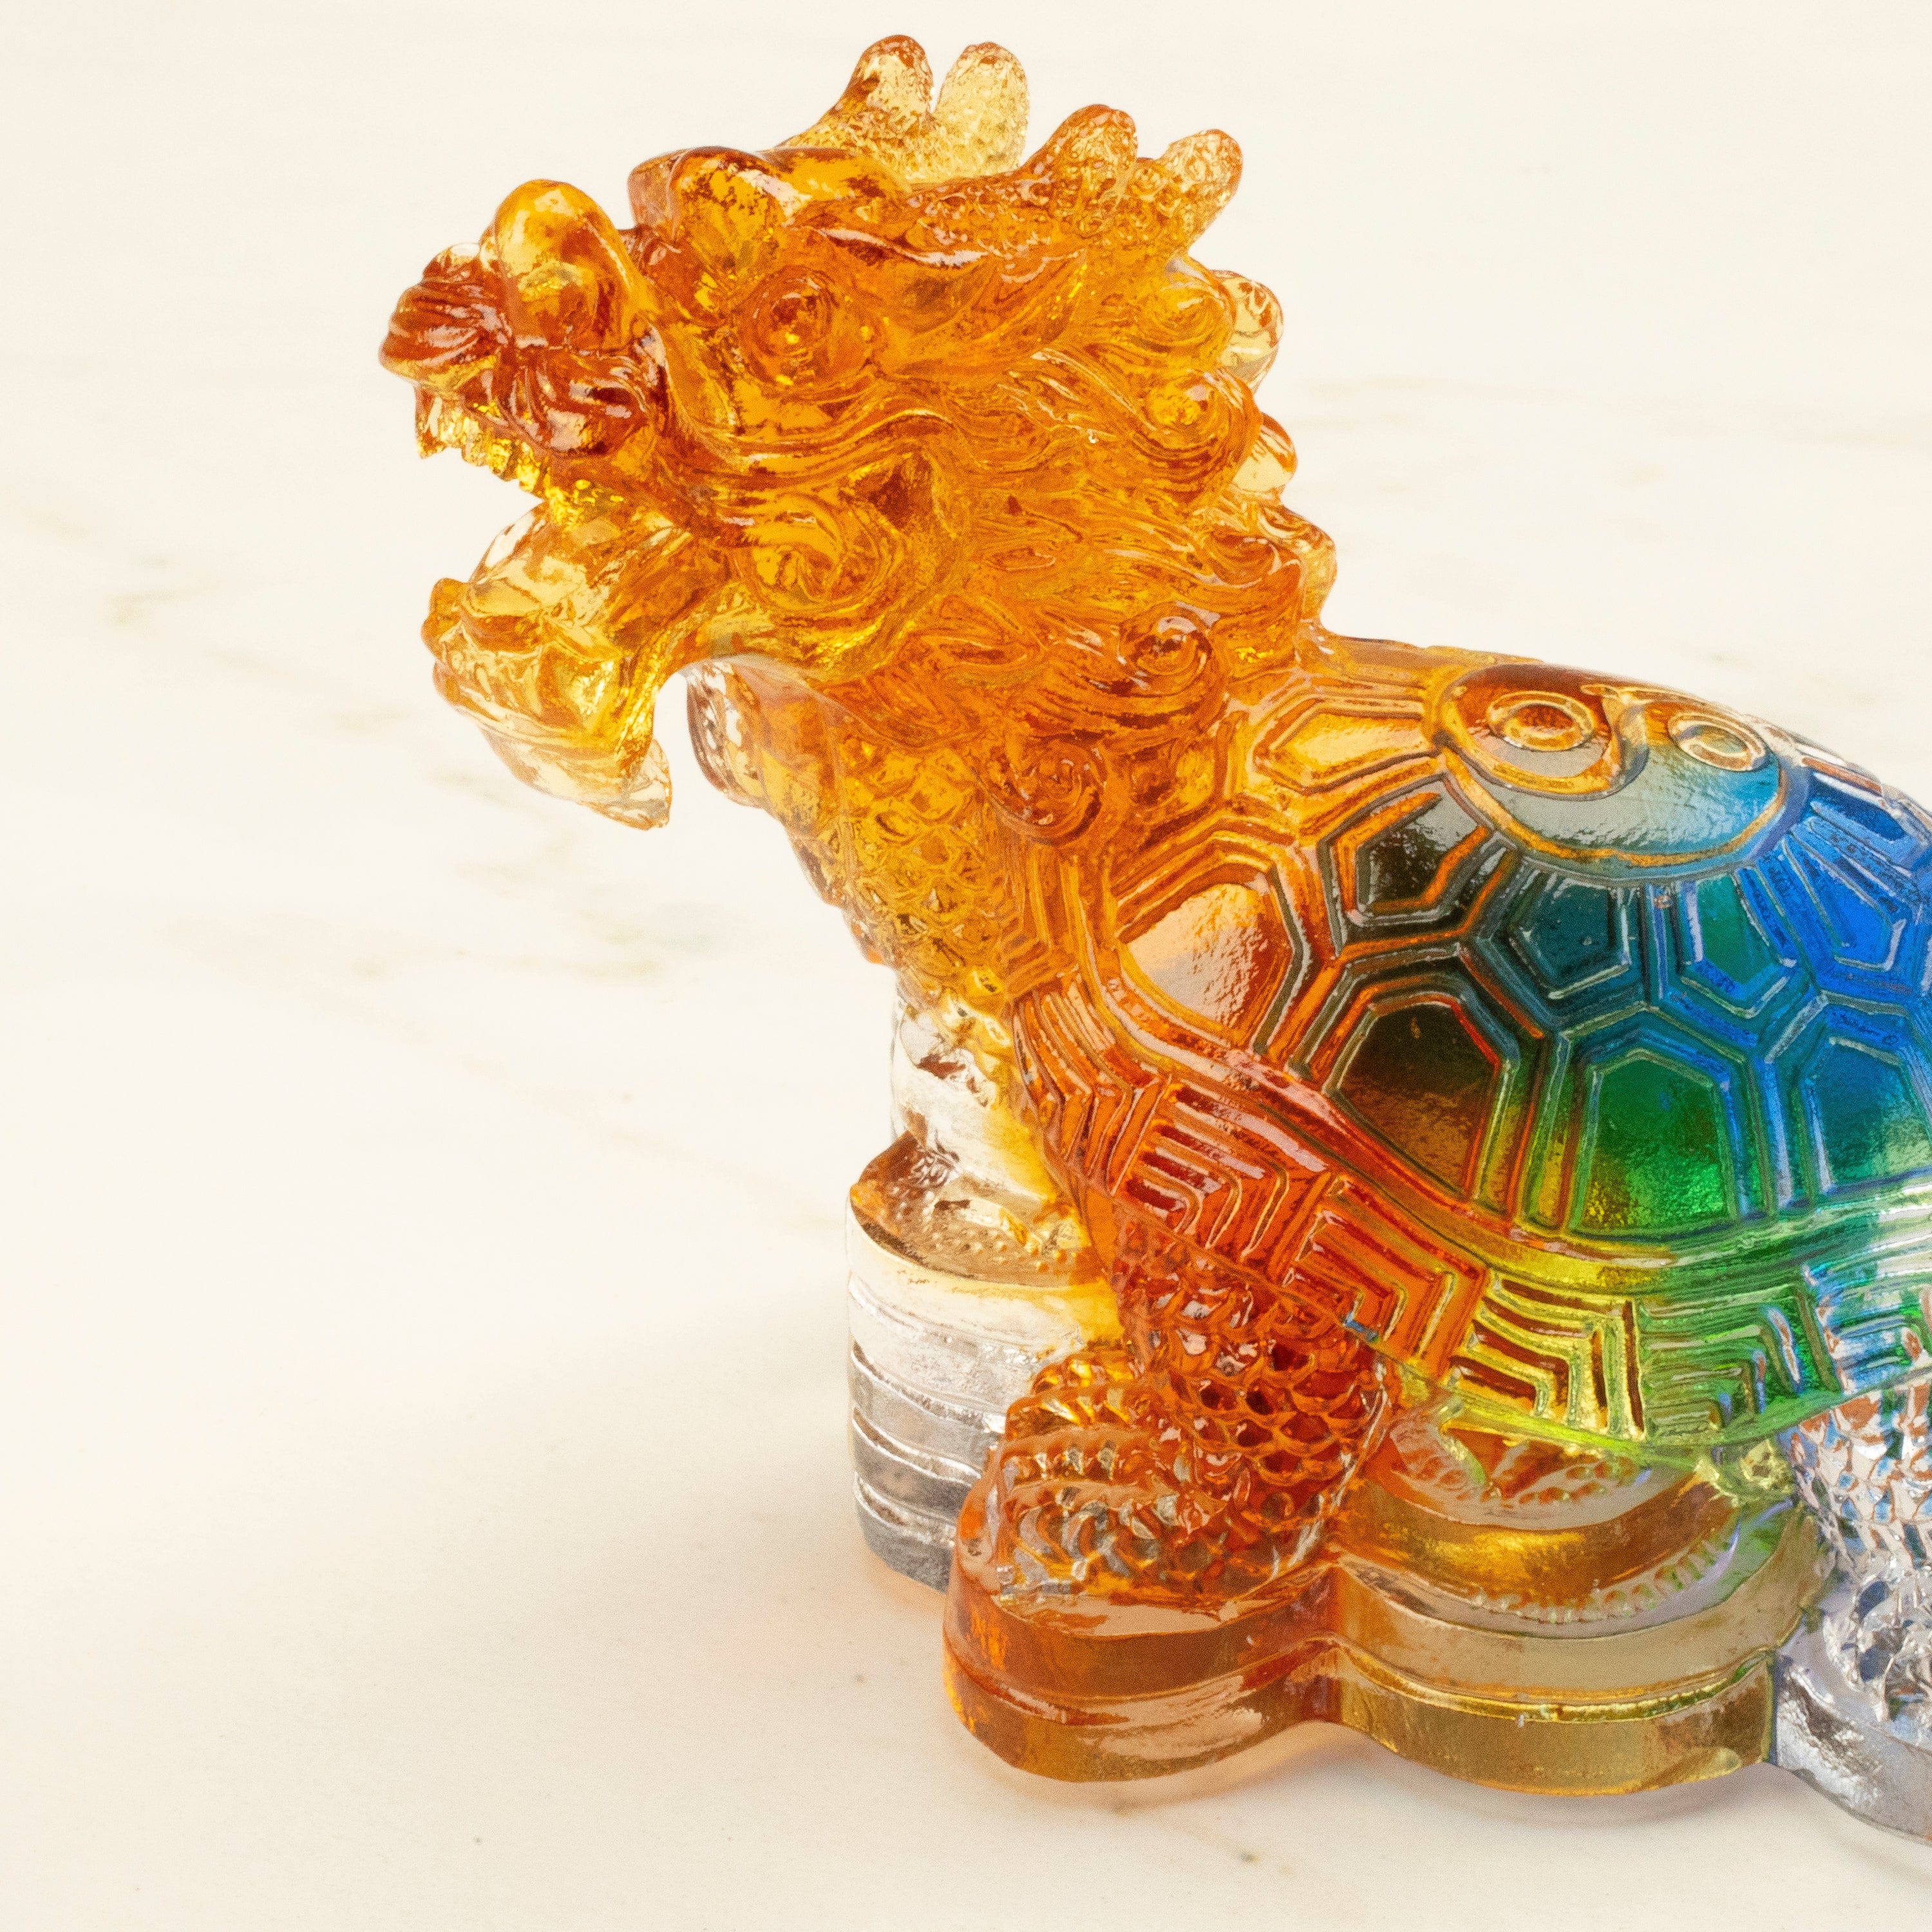 Kalifano Crystal Carving Mystical Ancient Turtle Dragon Crystal Carving - A Symbol of Longevity and Wisdom CR85-DT